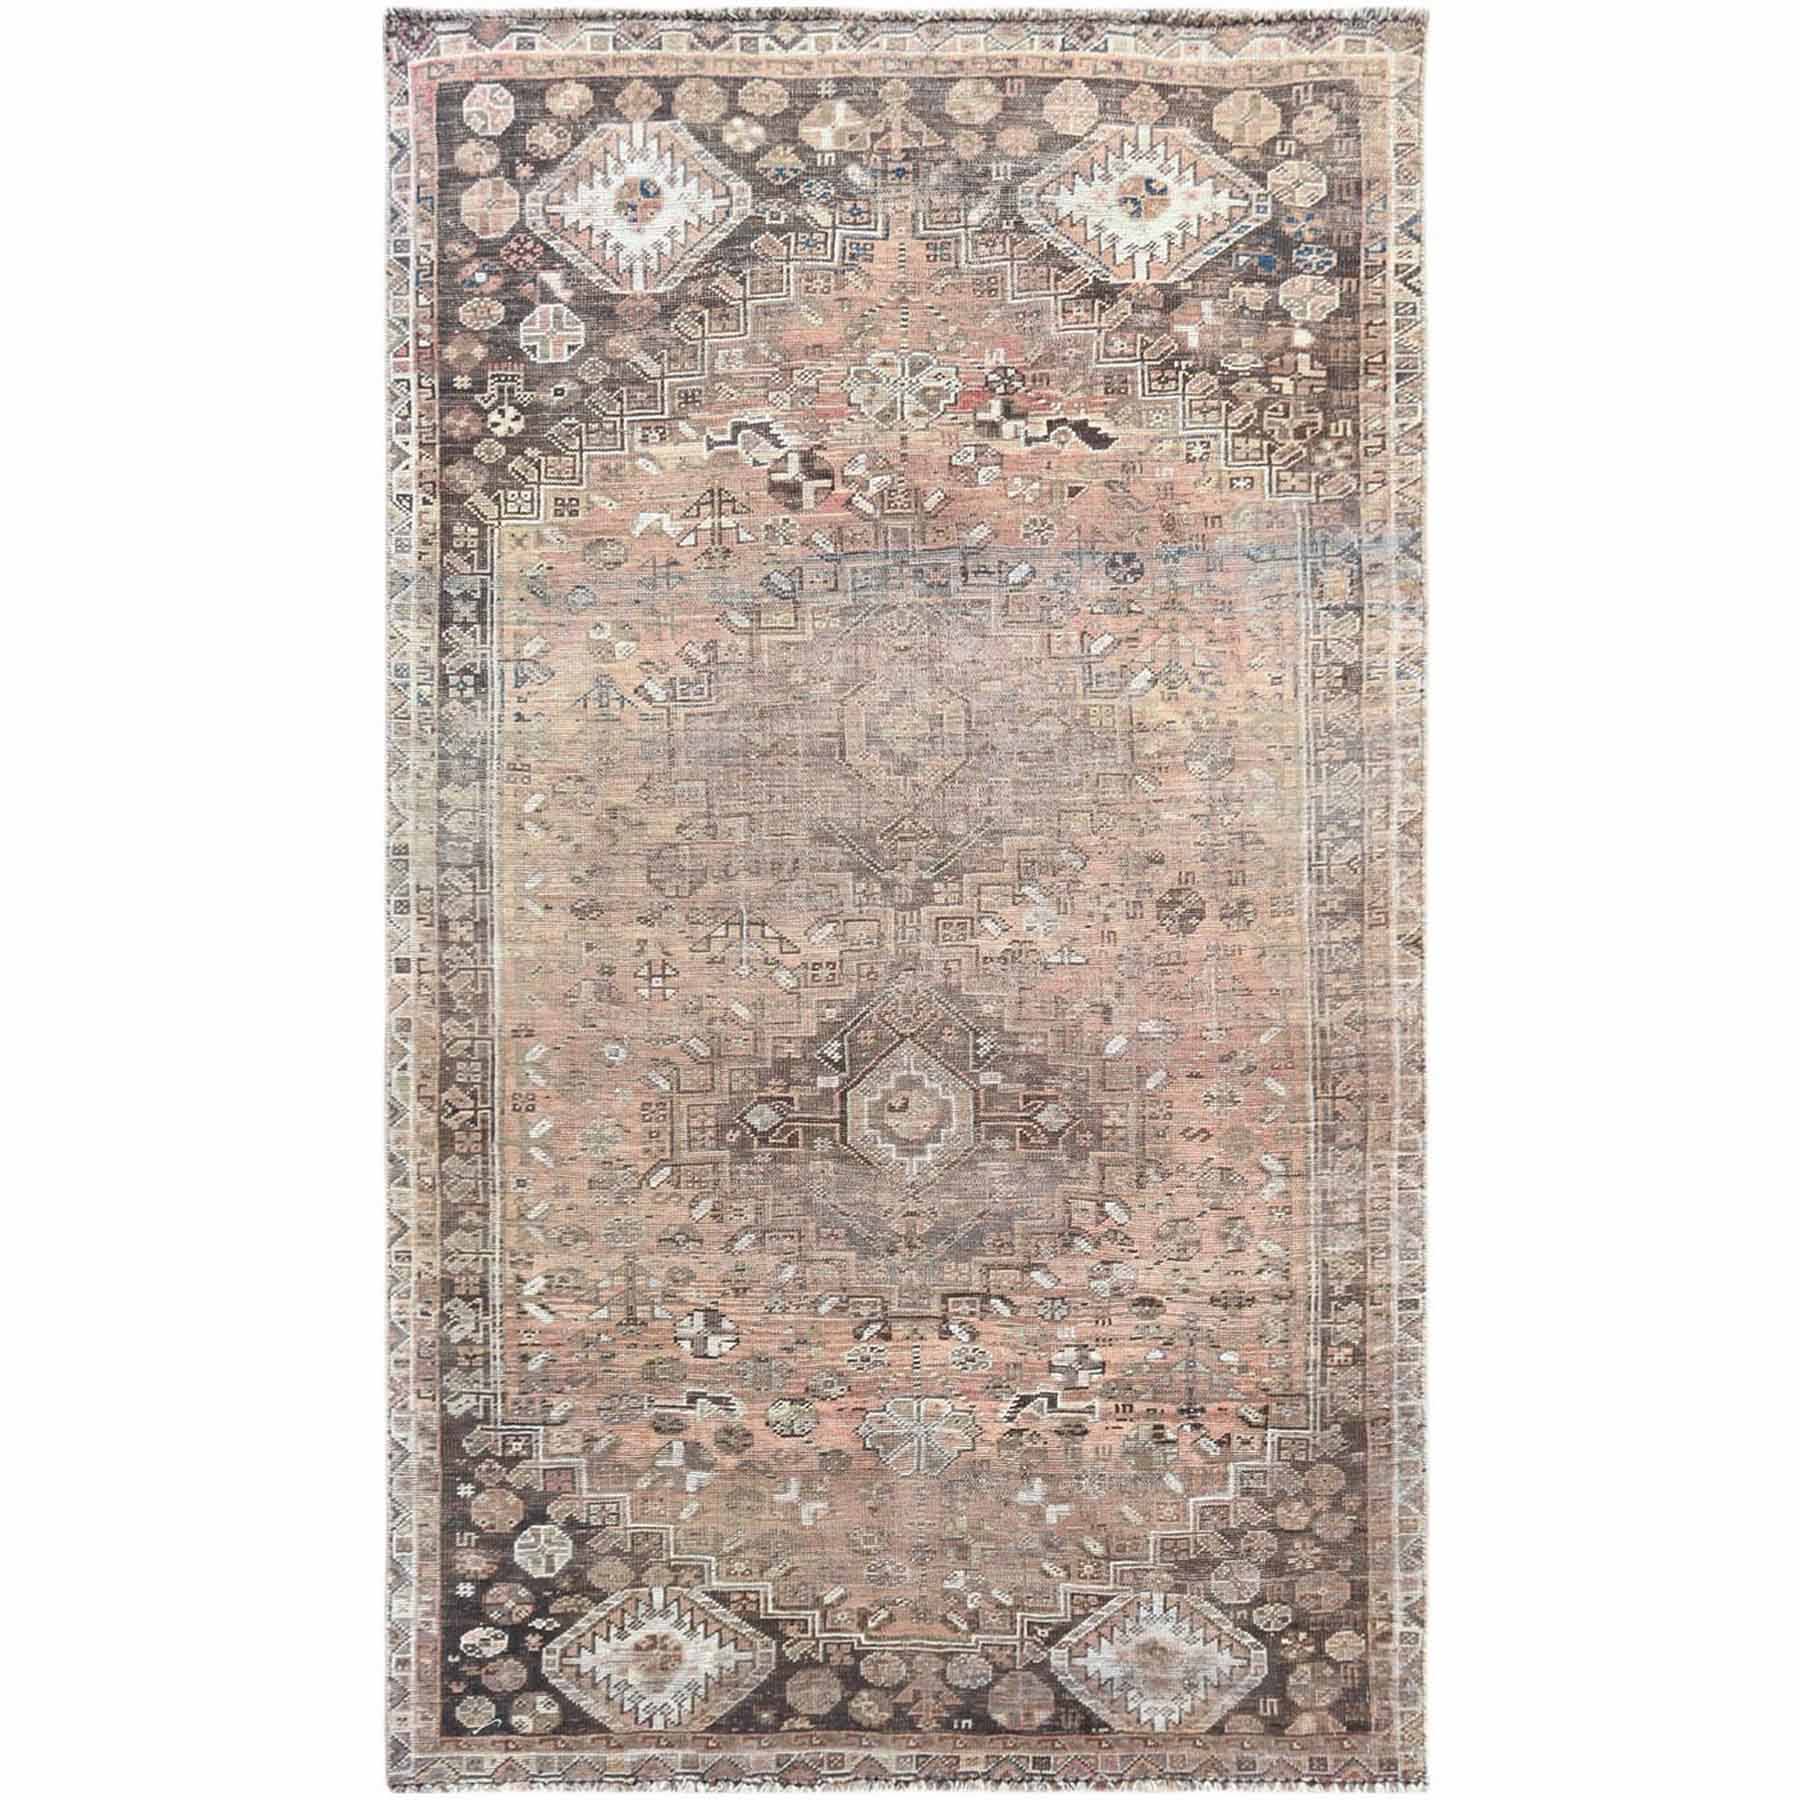 Overdyed-Vintage-Hand-Knotted-Rug-303110